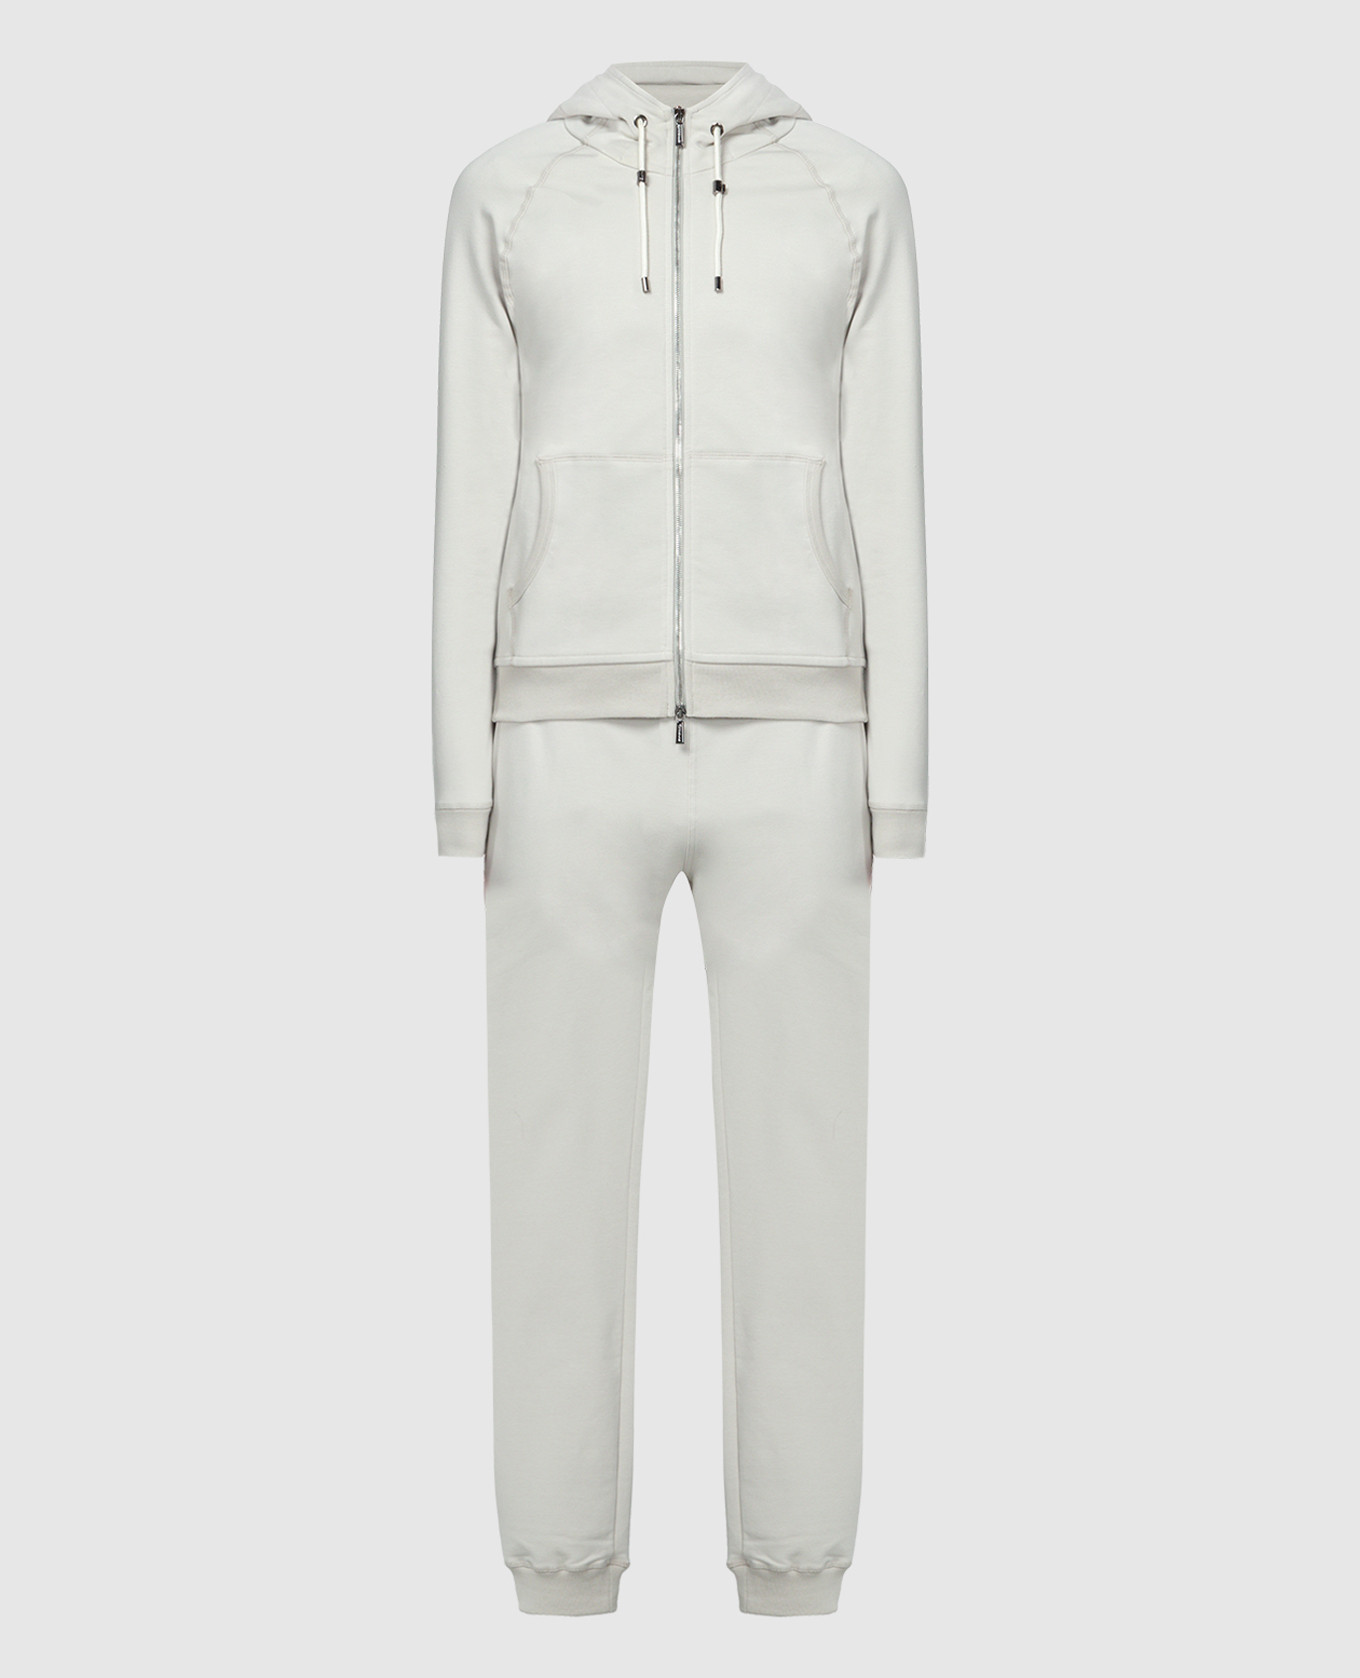 Norcia gray sports suit